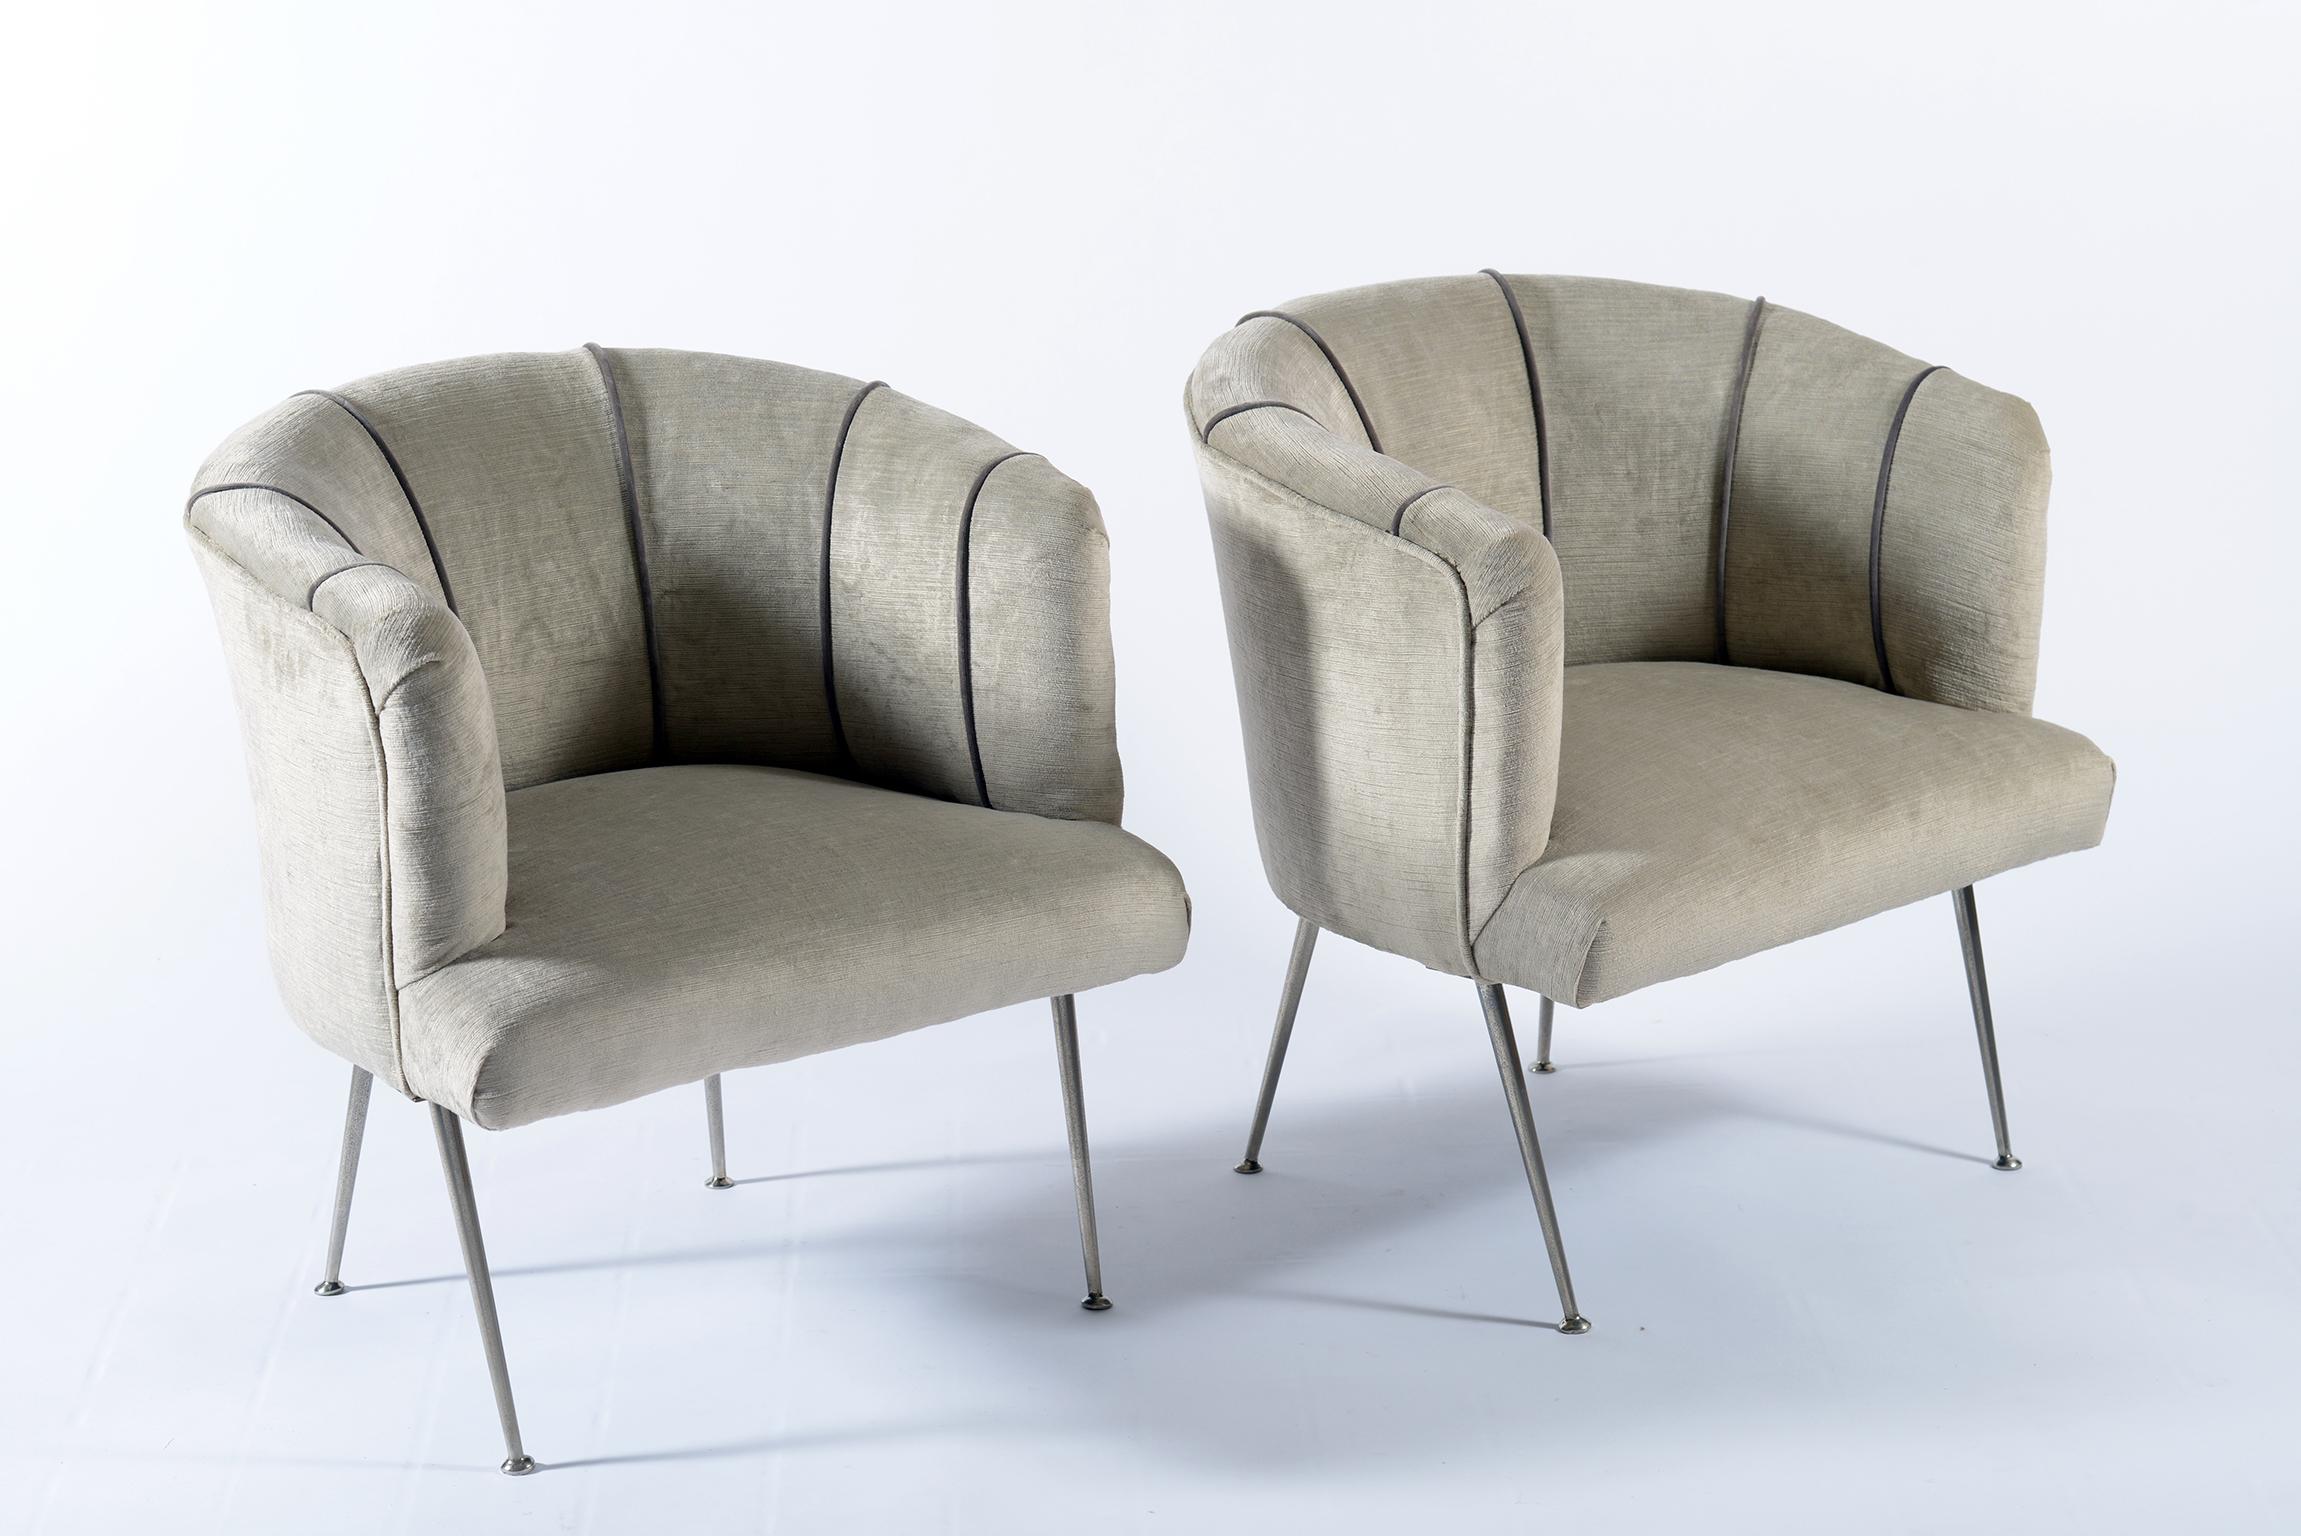 Pair of small armchairs with a semi-moon curved skirt, thin legs in chromed metal ending with a chrome-plated metal disc. The seats were newly covered with beige velvet and profiles with trimmings of a darker shade of beige.
Italy Mid-Century